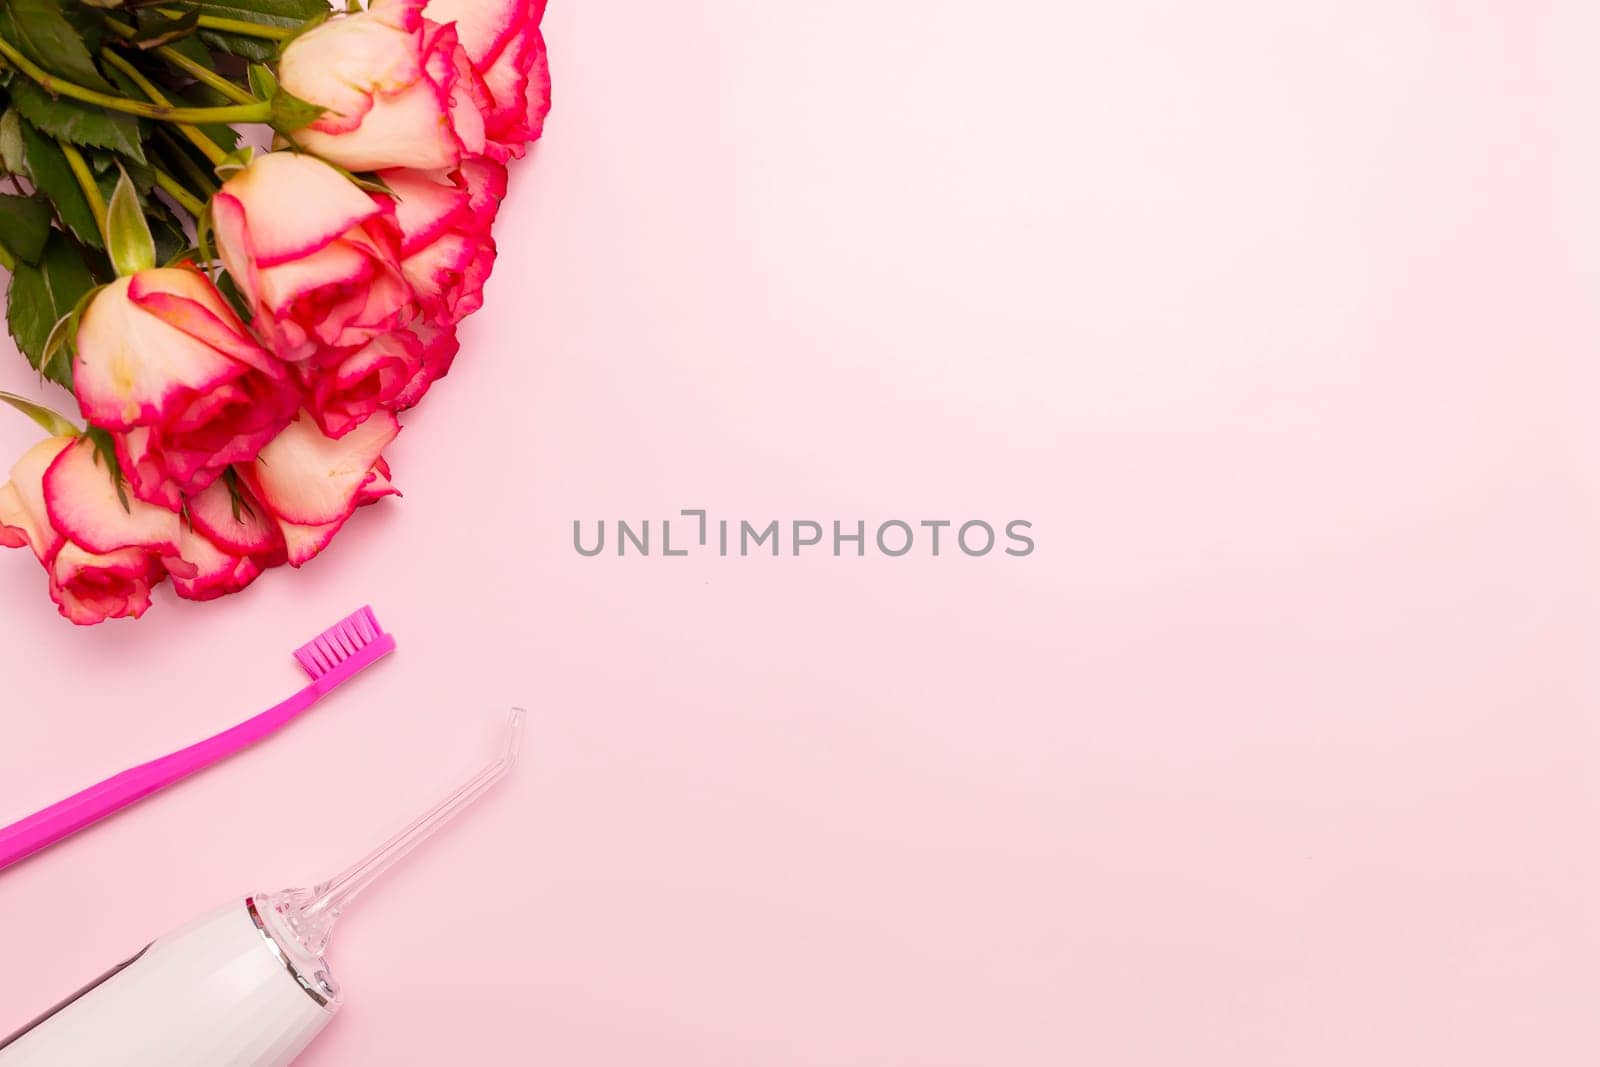 Happy International Dentist Day rose flowers, oral teeth irrigator, toothbrush on pink background mockup. Dental care. Greeting card for professional holiday. Copy space, horizontal. Top view